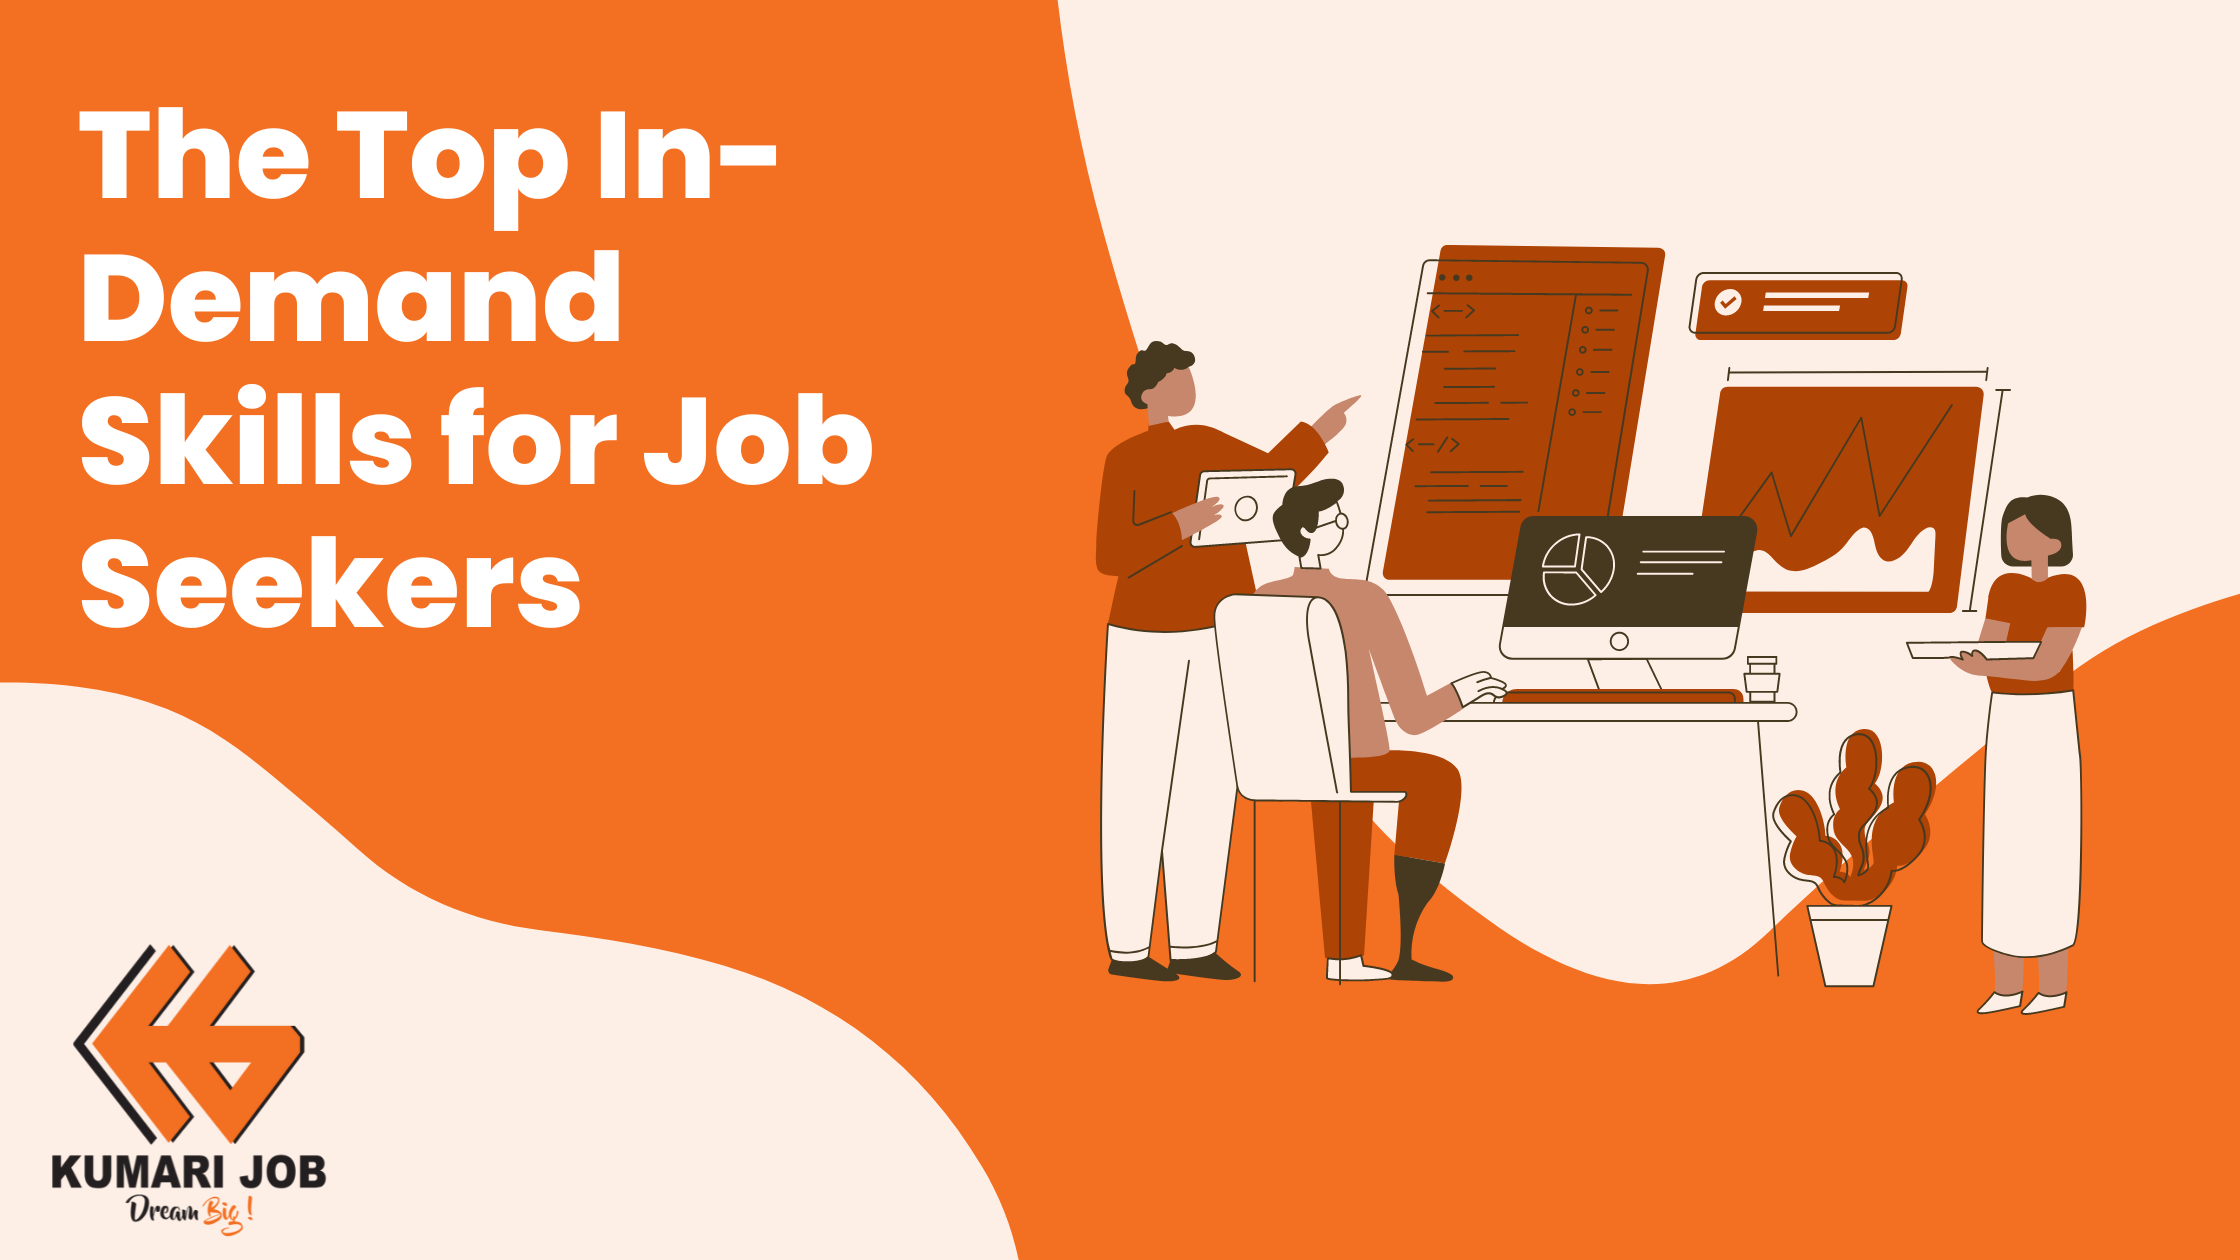 The Top In-Demand Skills for Job Seekers